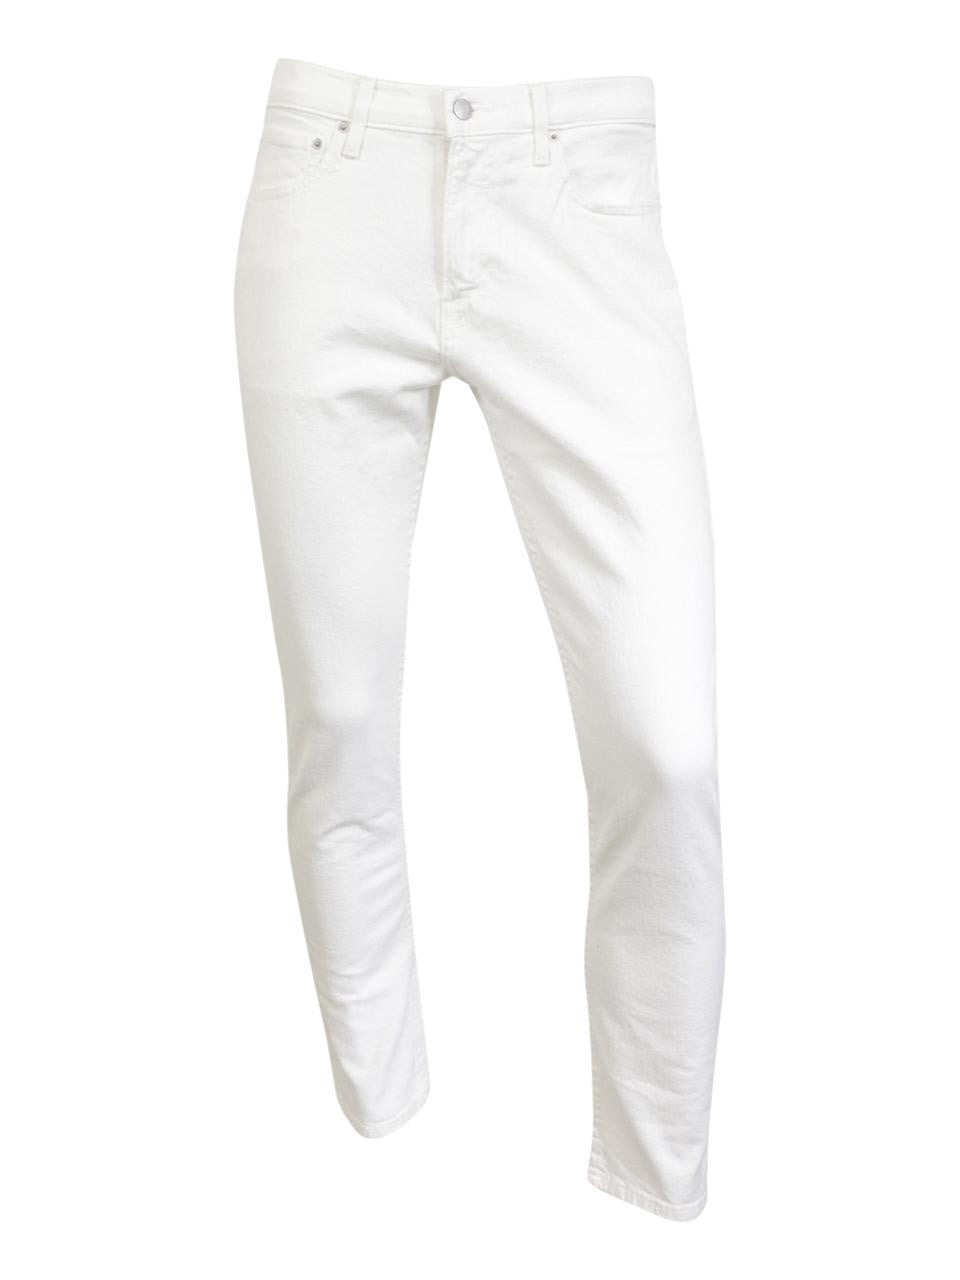 white jeans gents